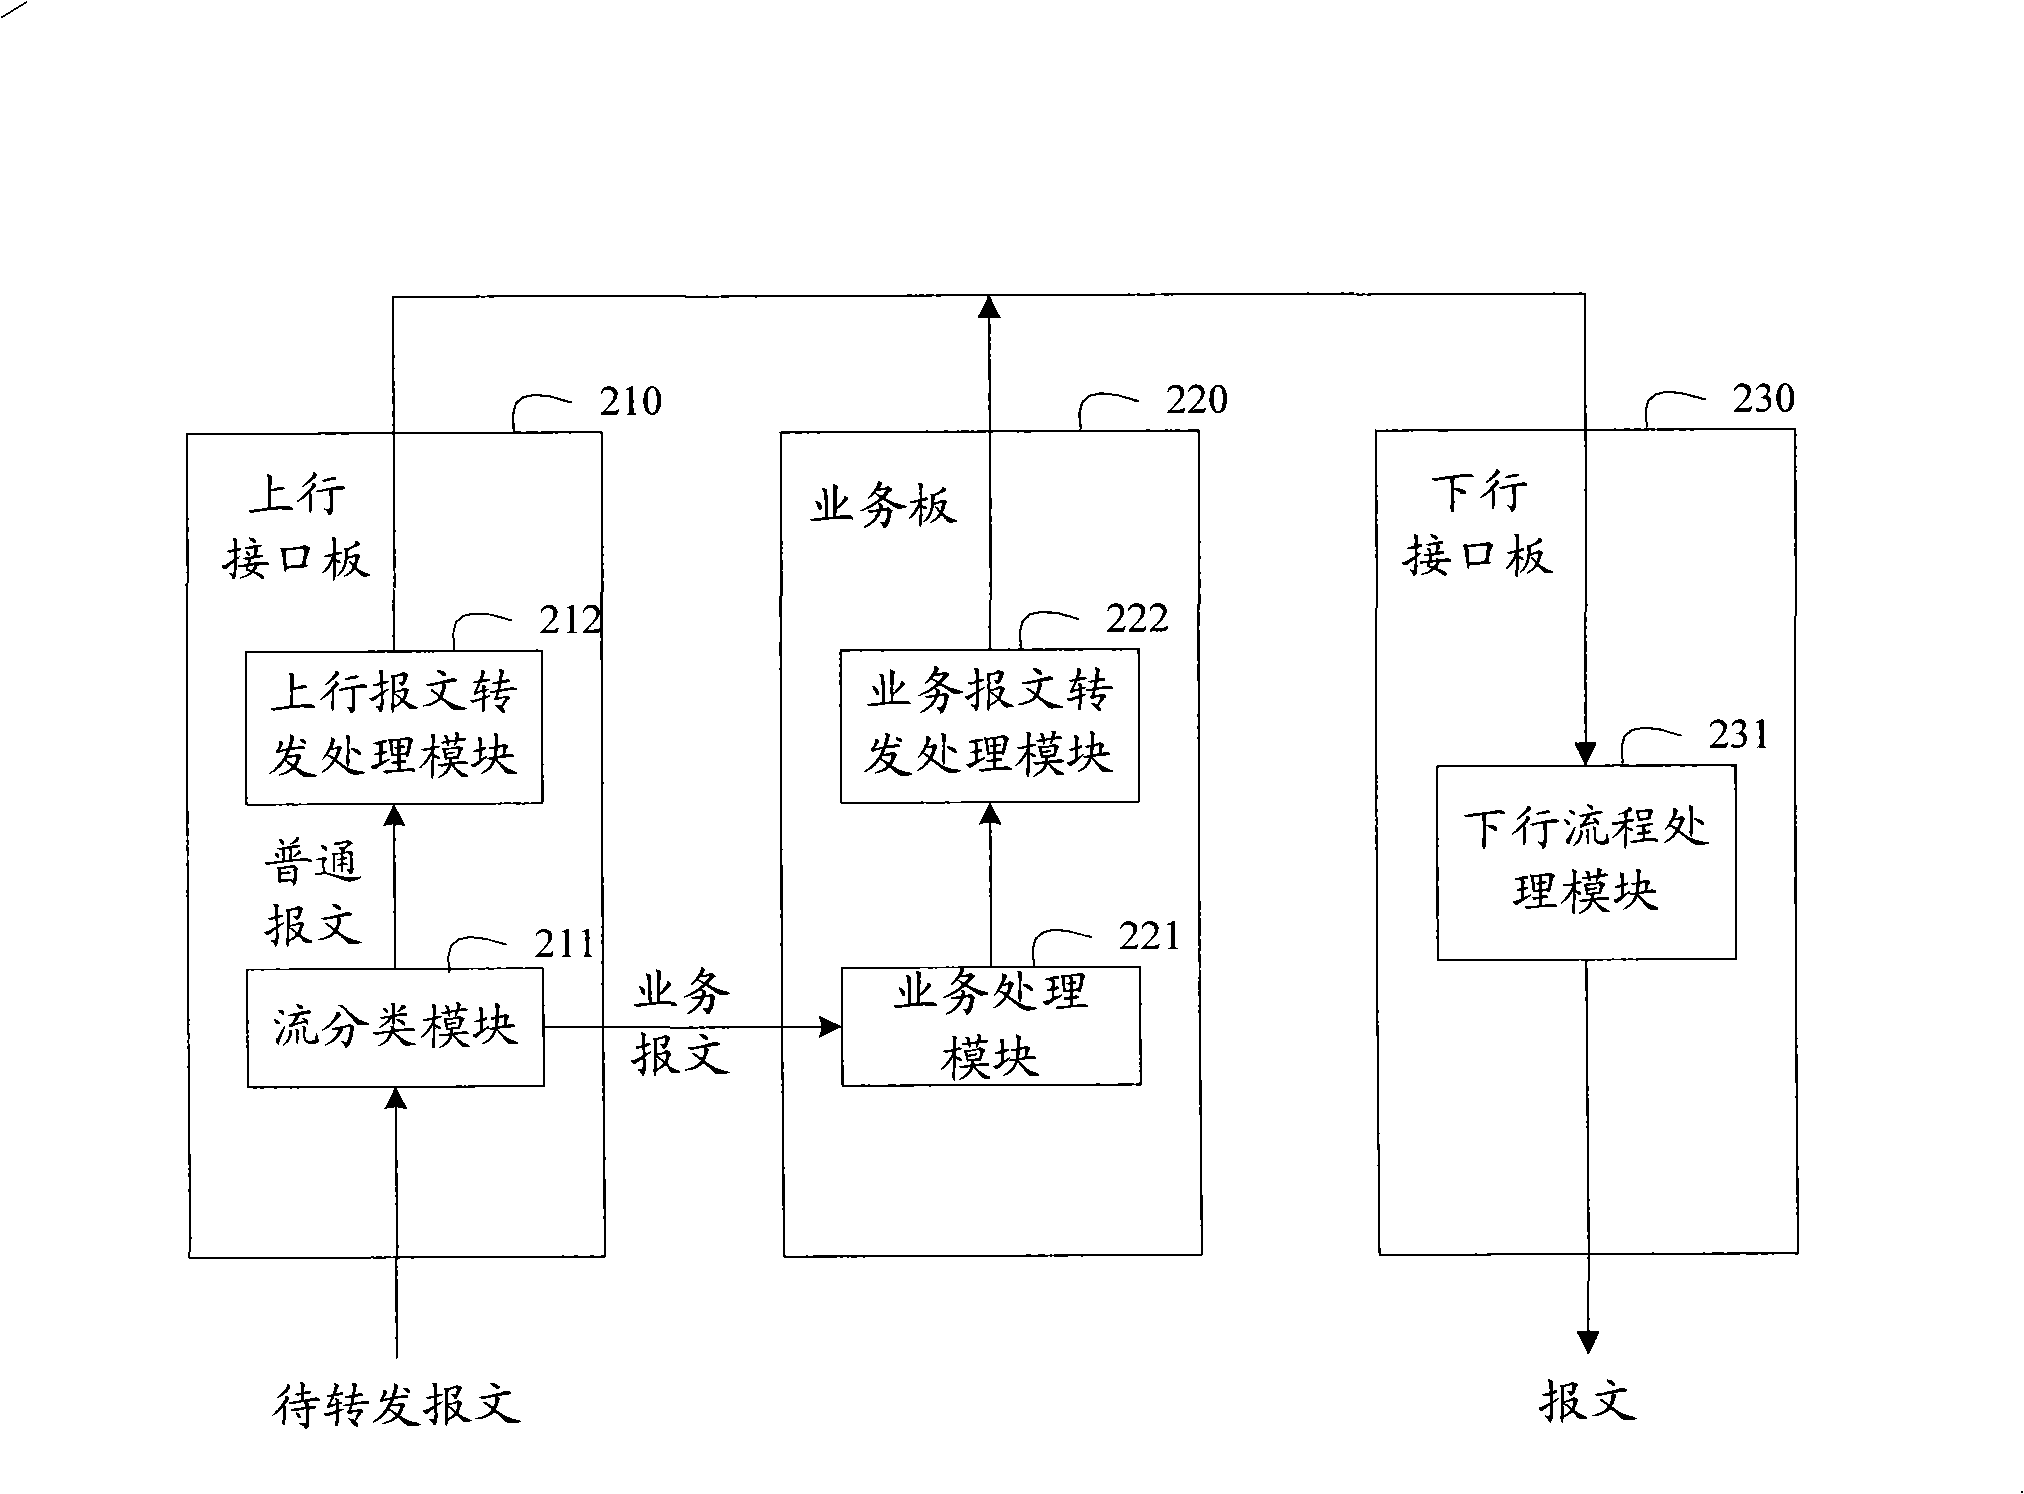 Packet forward method, device and its uplink interface board